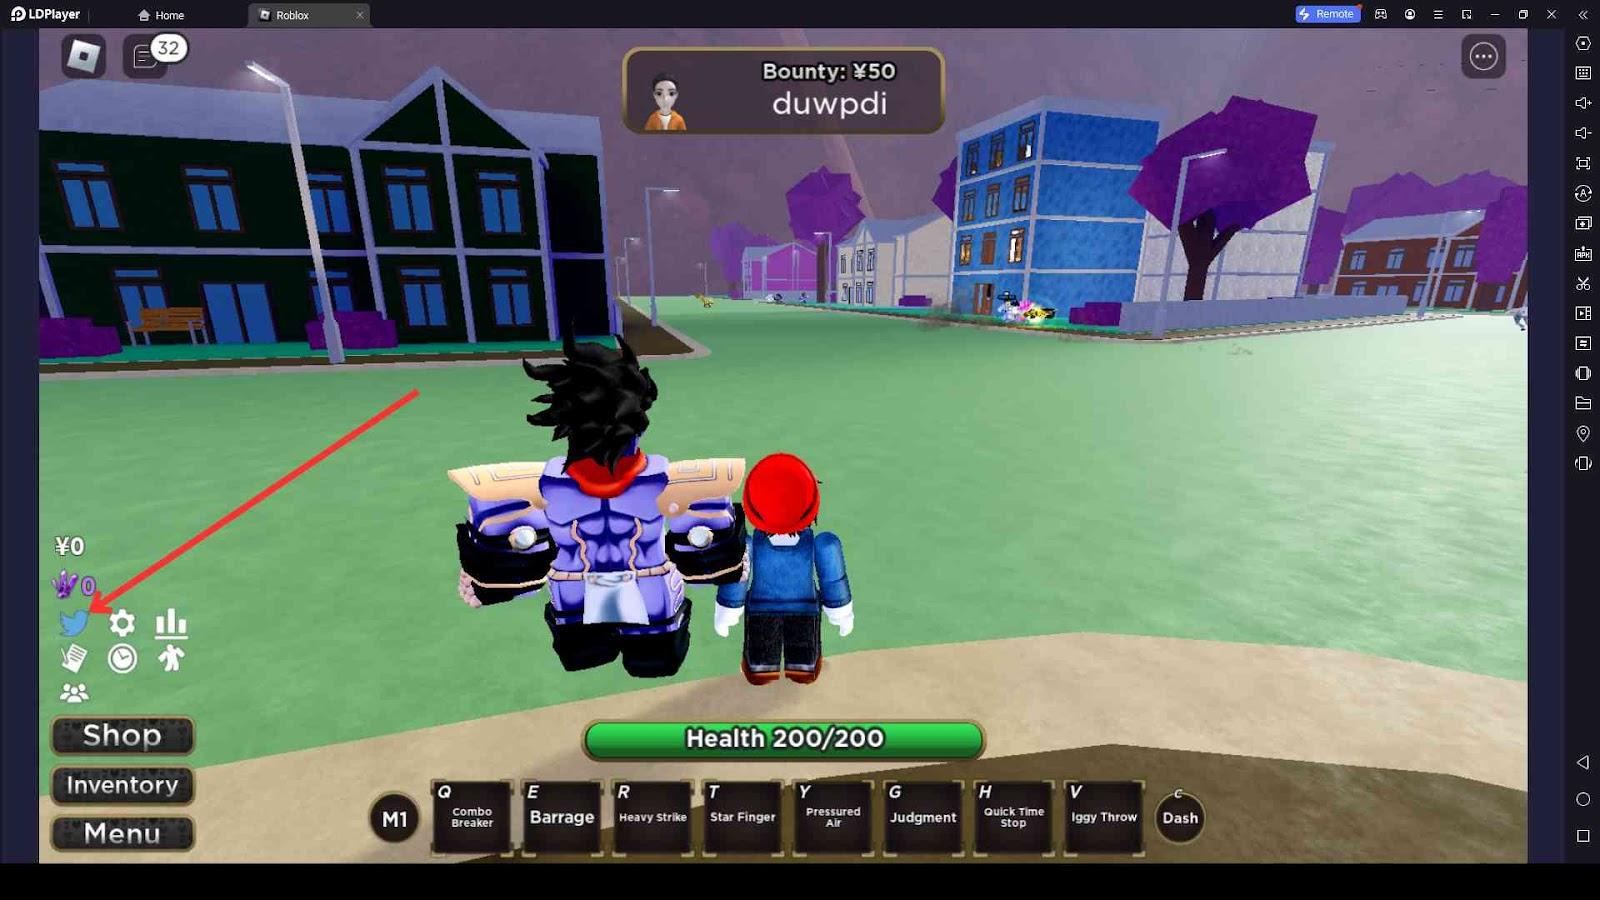 Roblox Shadow Boxing Fights Codes – The Best Free Rewards to Earn in  December 2023-Redeem Code-LDPlayer